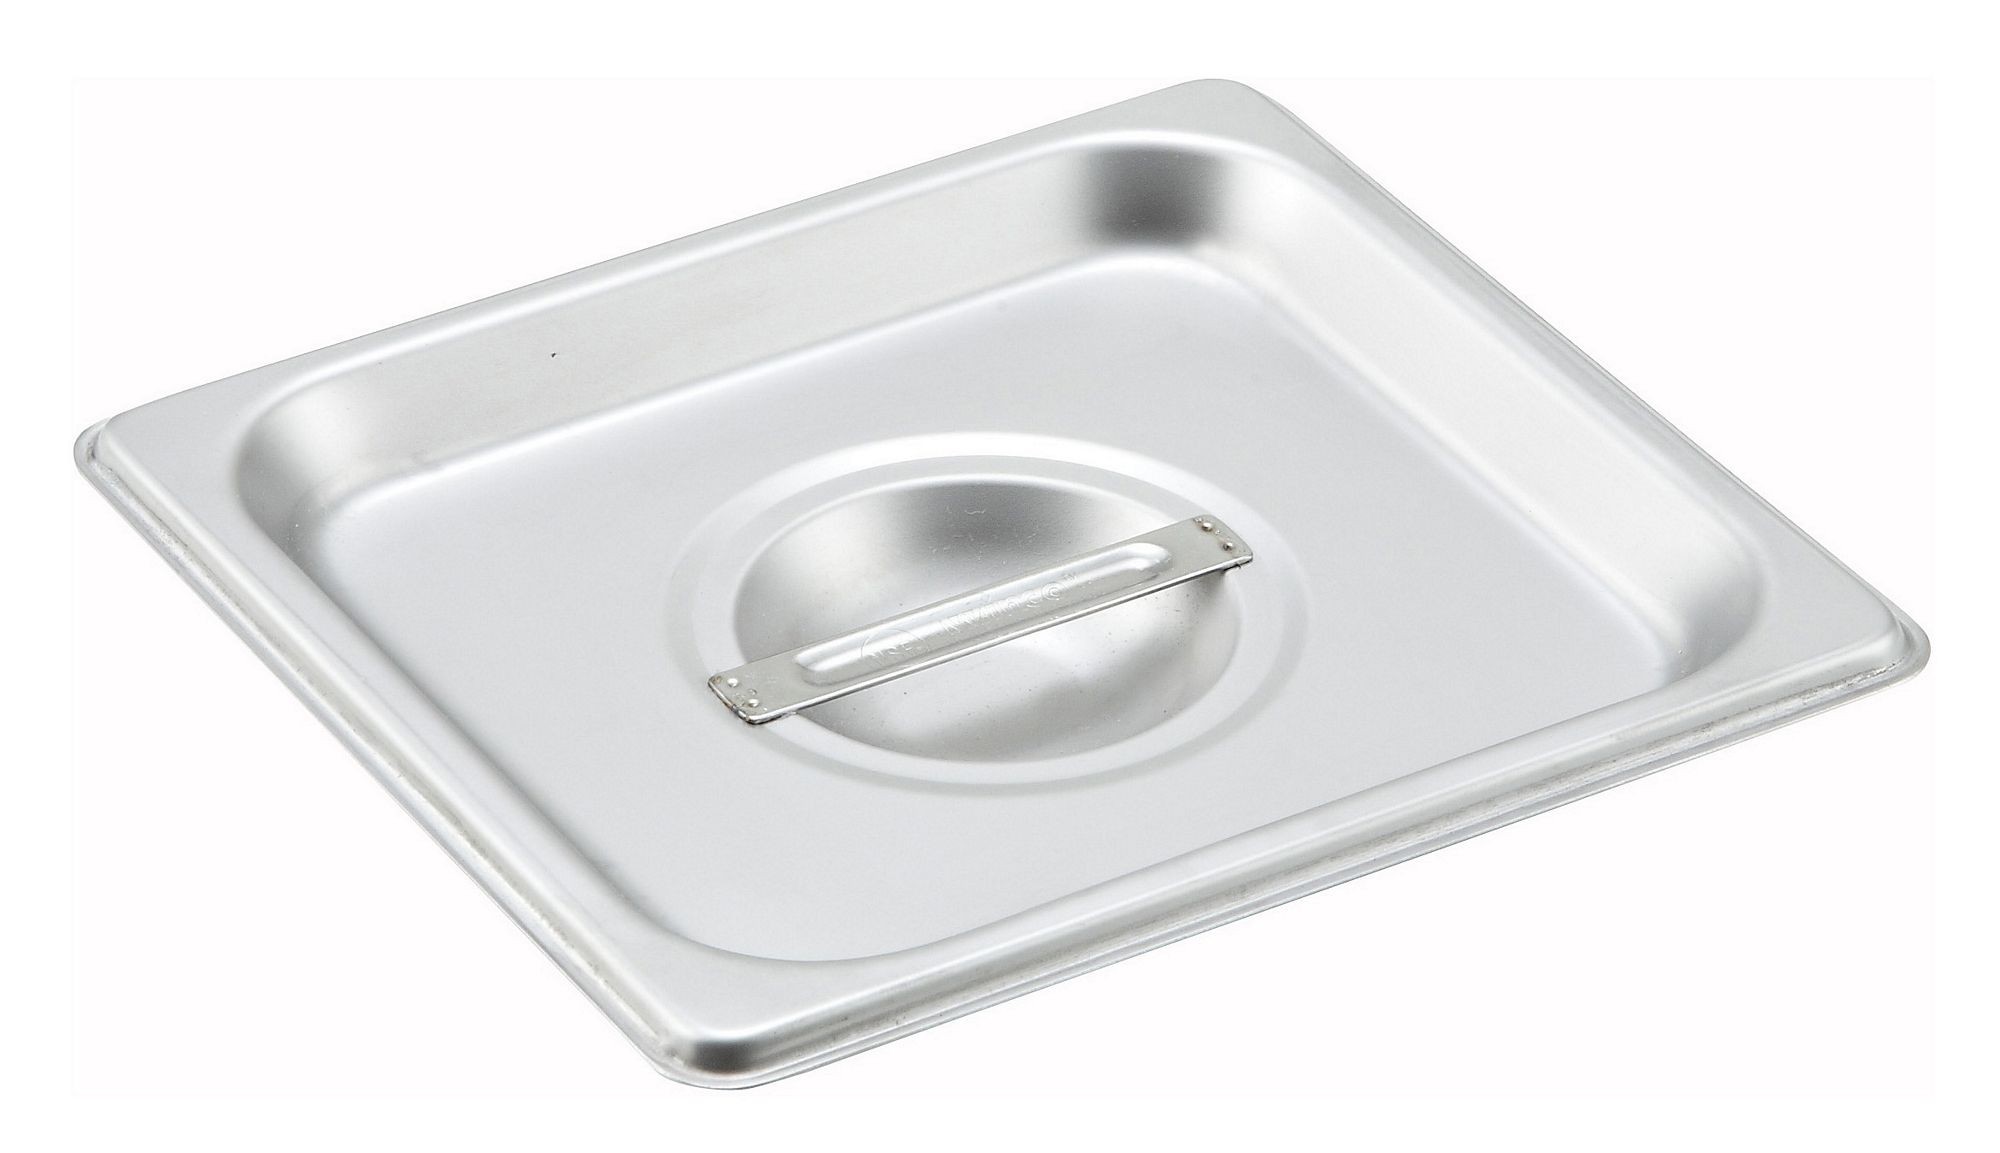 Winco SPSCS Solid 1/6 Size Steam Table Pan Cover